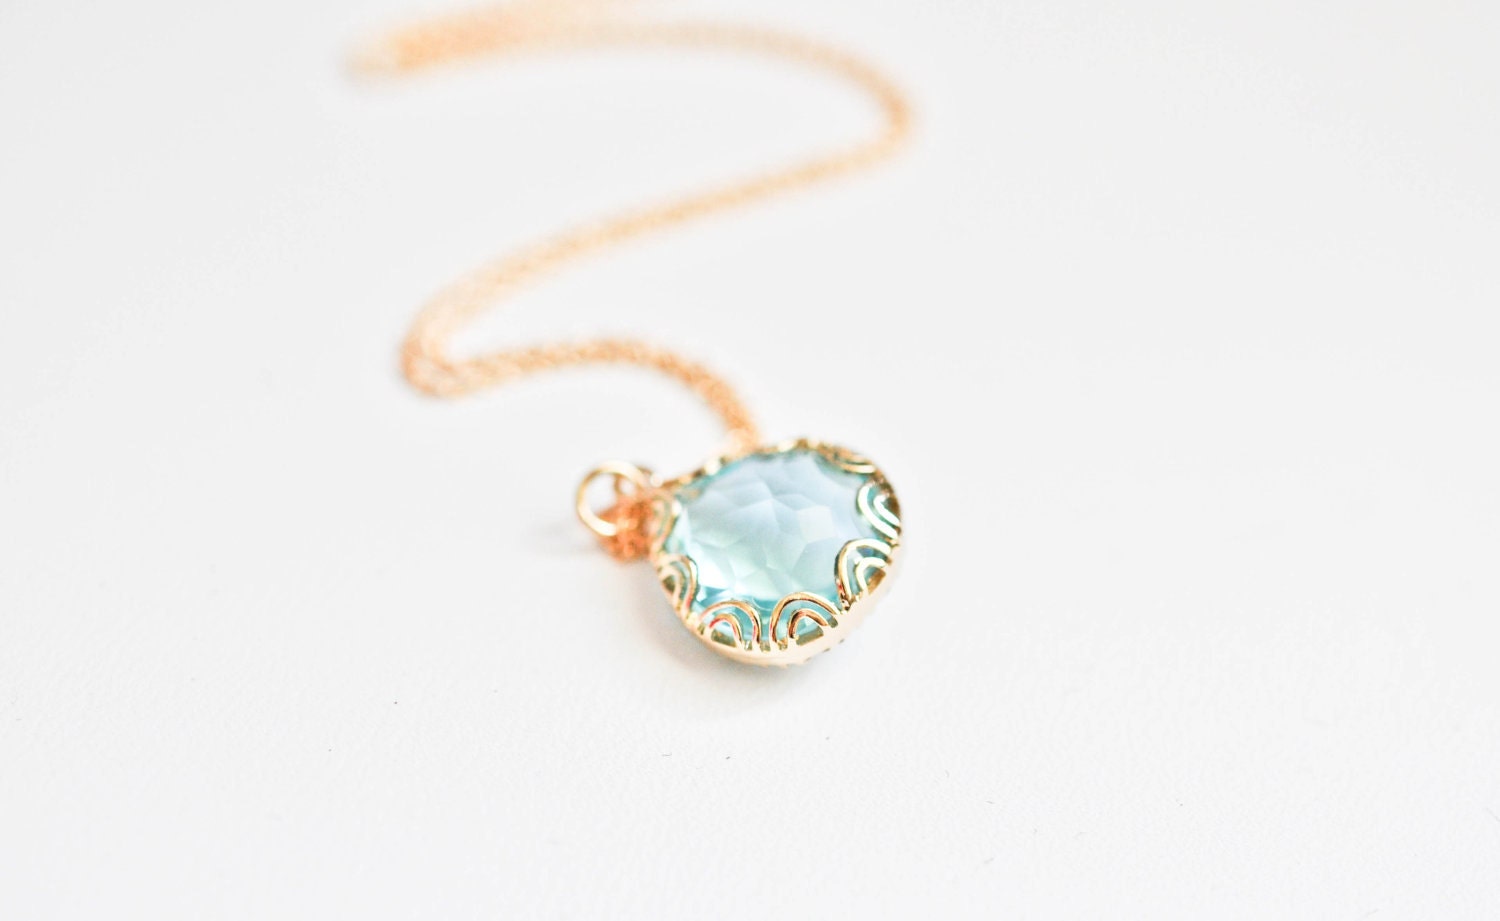 Blue Moon Gold Ed.--Blue Glass Pendant on Gold Filled Chain, Aqua Necklace, Bridesmaids Gifts, Weddings, Mother's Day Gift, Birthday Gift